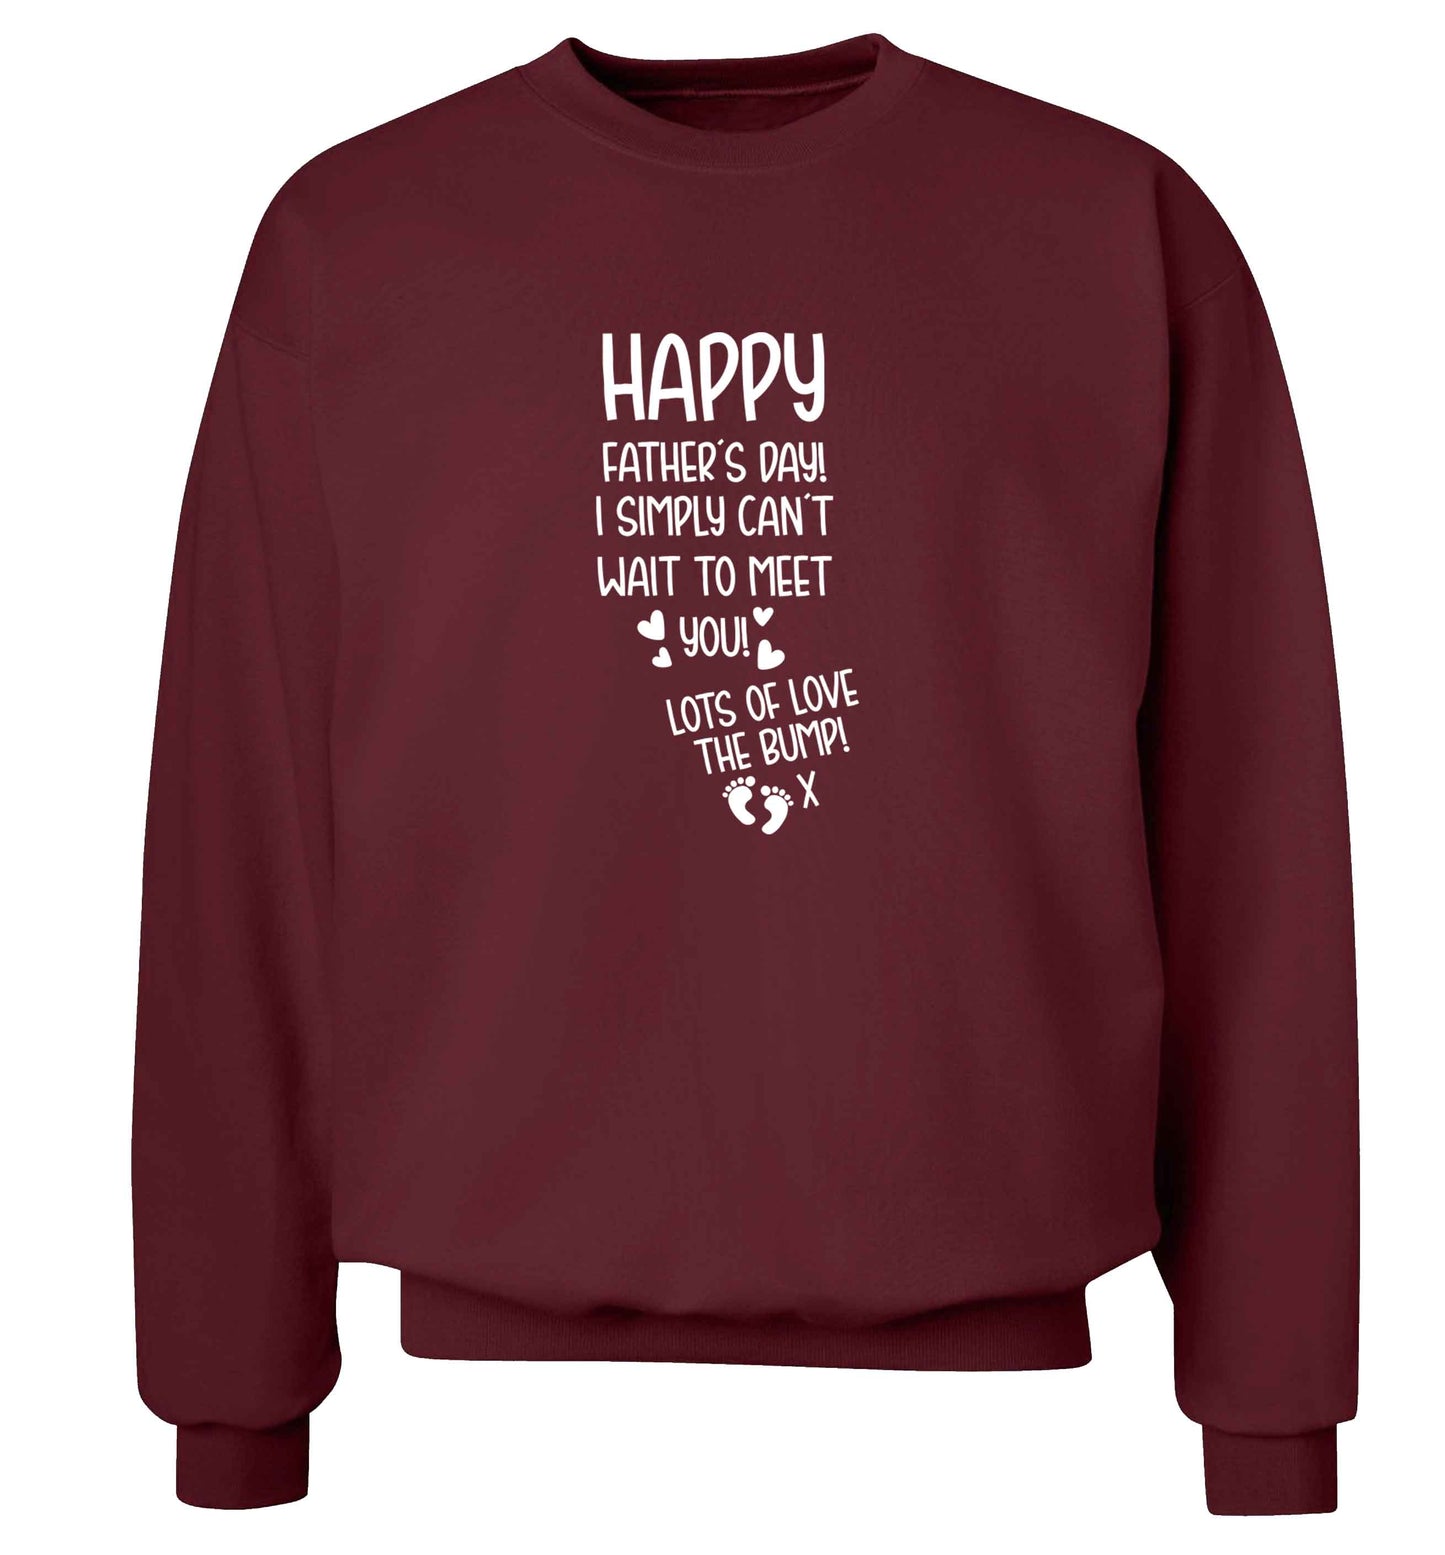 Happy Father's day daddy I can't wait to meet you lot's of love the bump! adult's unisex maroon sweater 2XL